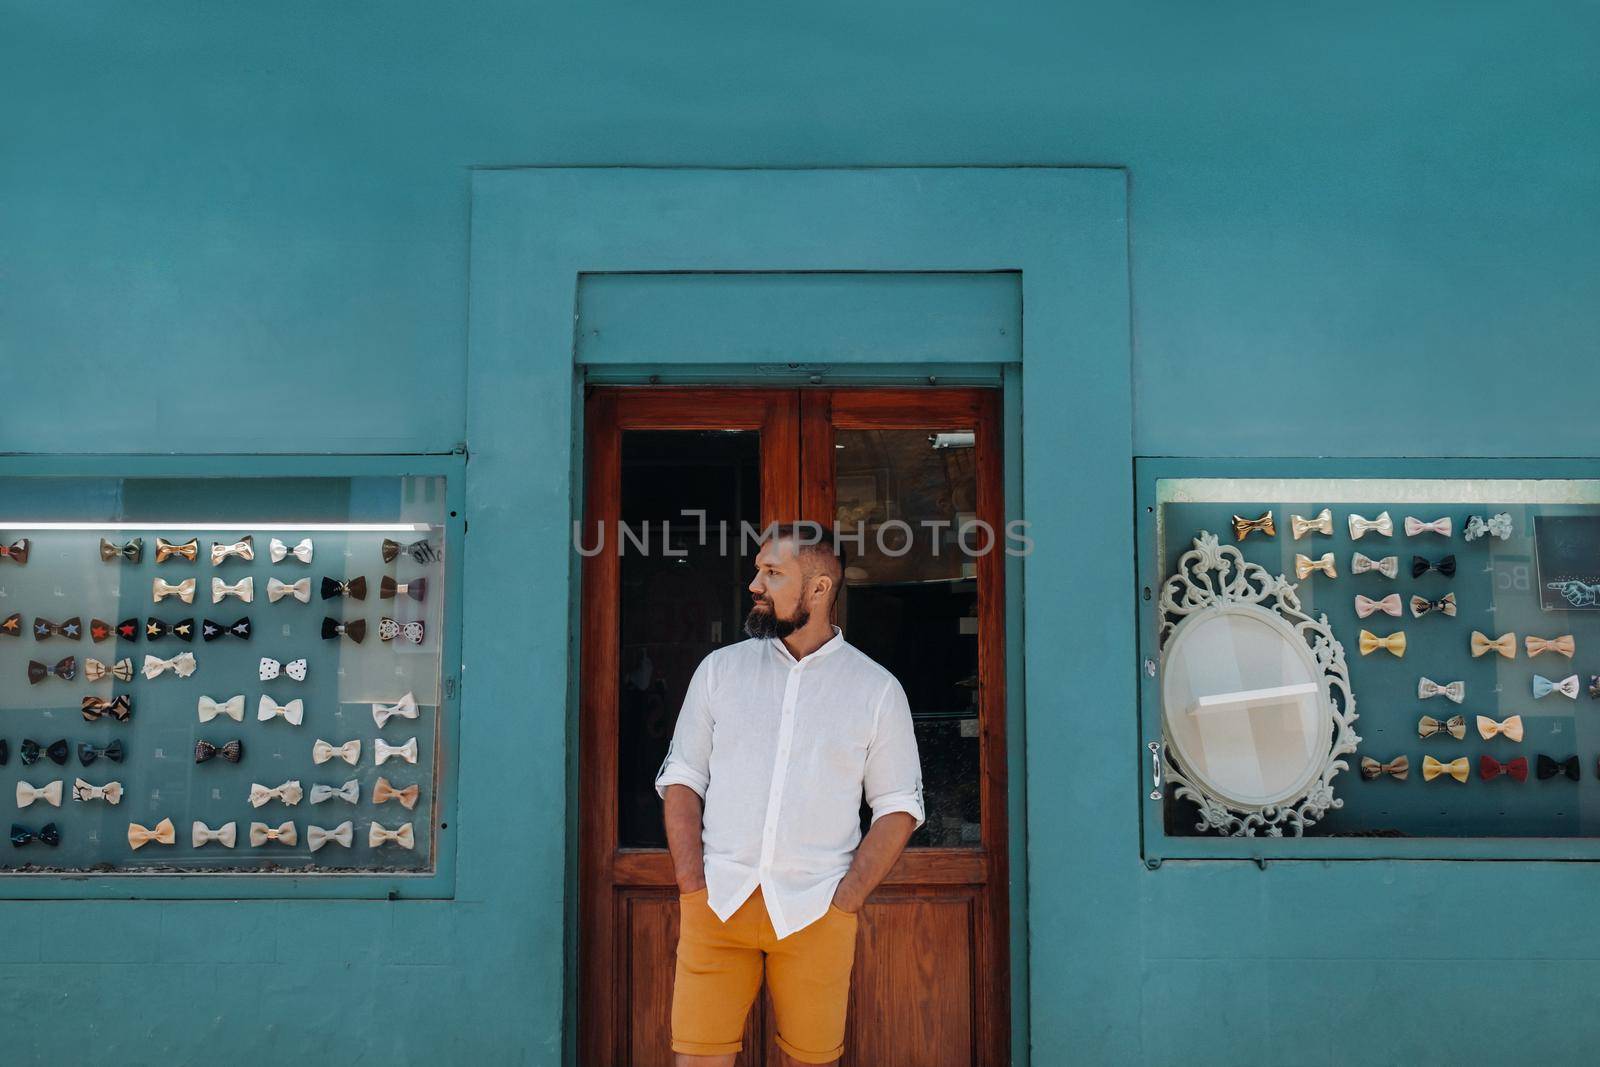 A man in the Old town of La Laguna on the island of Tenerife on a Sunny day against the background of a counter with butterflies on costumes.Butterflies for men's costumes in the Canary Islands.Spain. by Lobachad